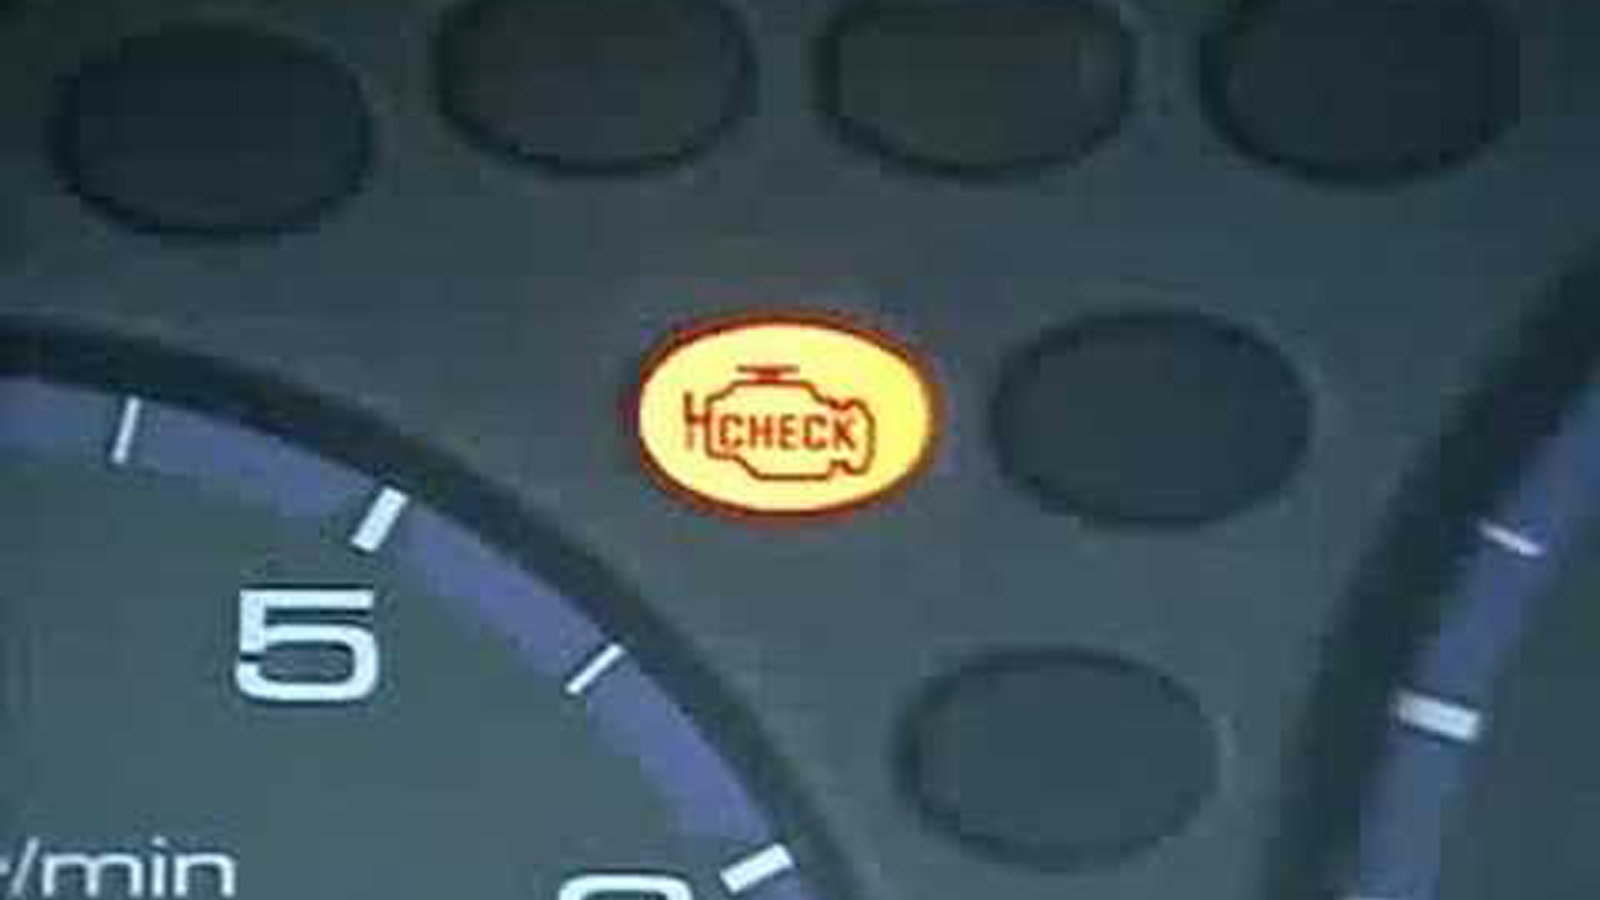 To Reset The Check Engine Light